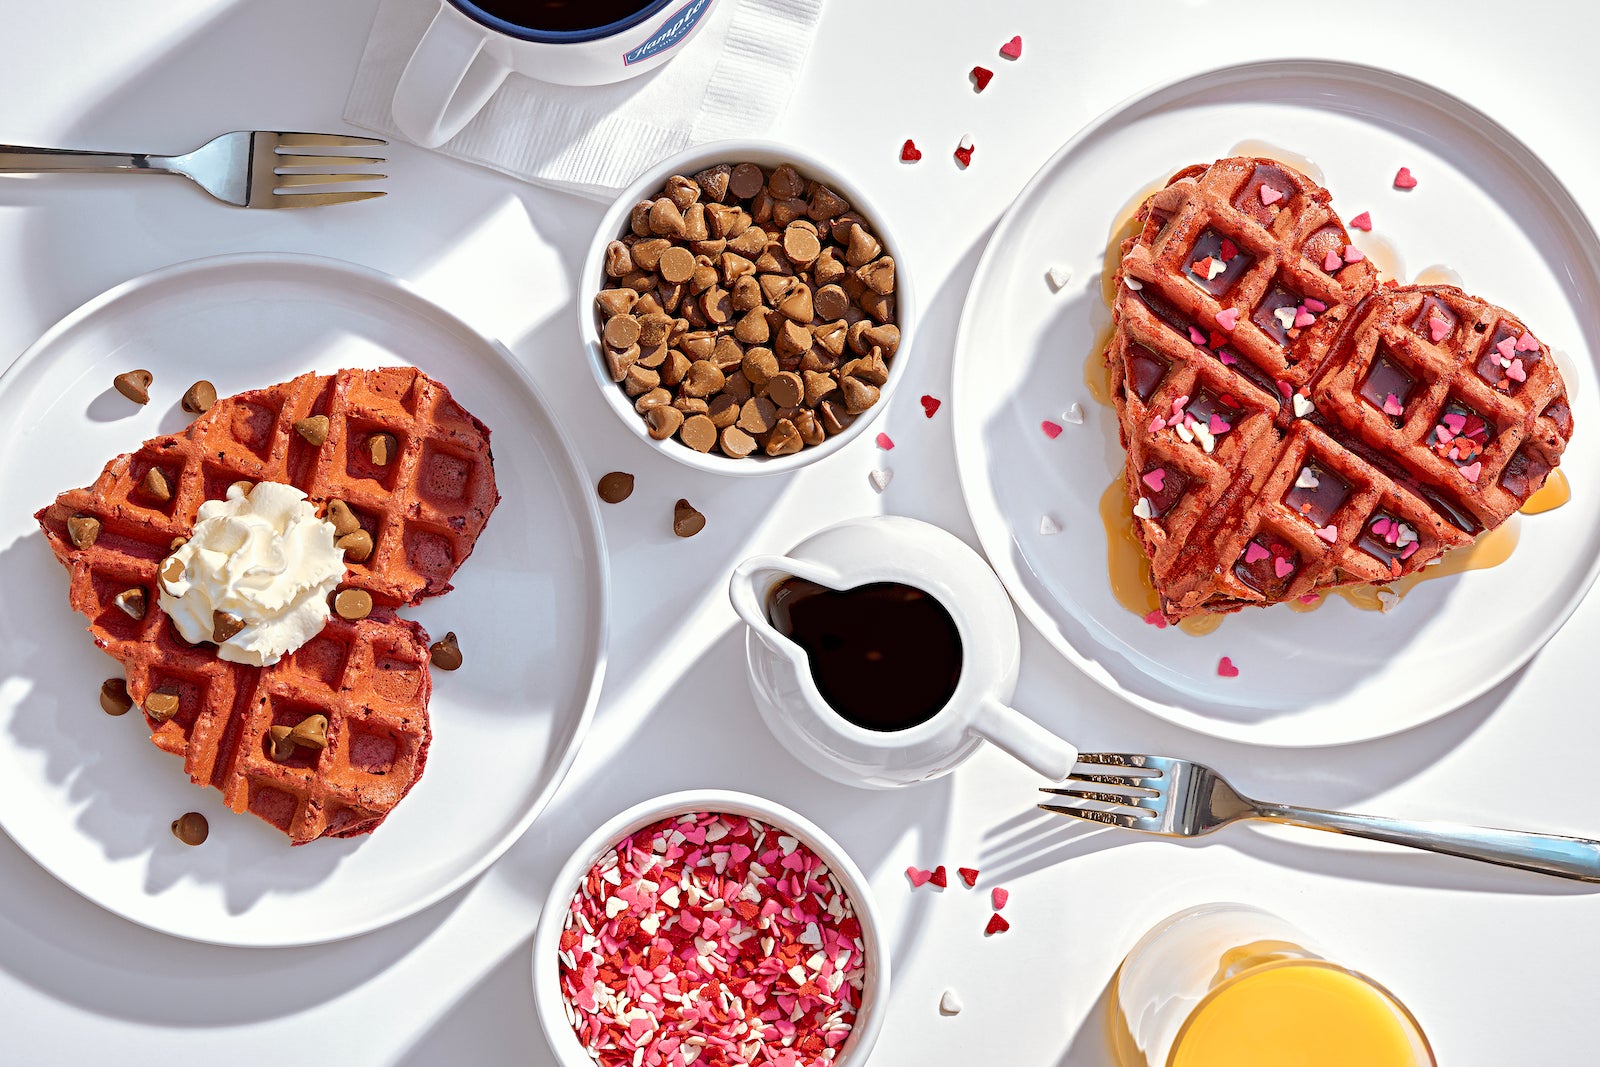 Heart-shaped pink waffles on white plates with bowls of chocolate chips, pink, red and white heart-shaped sprinkles, forks and coffee